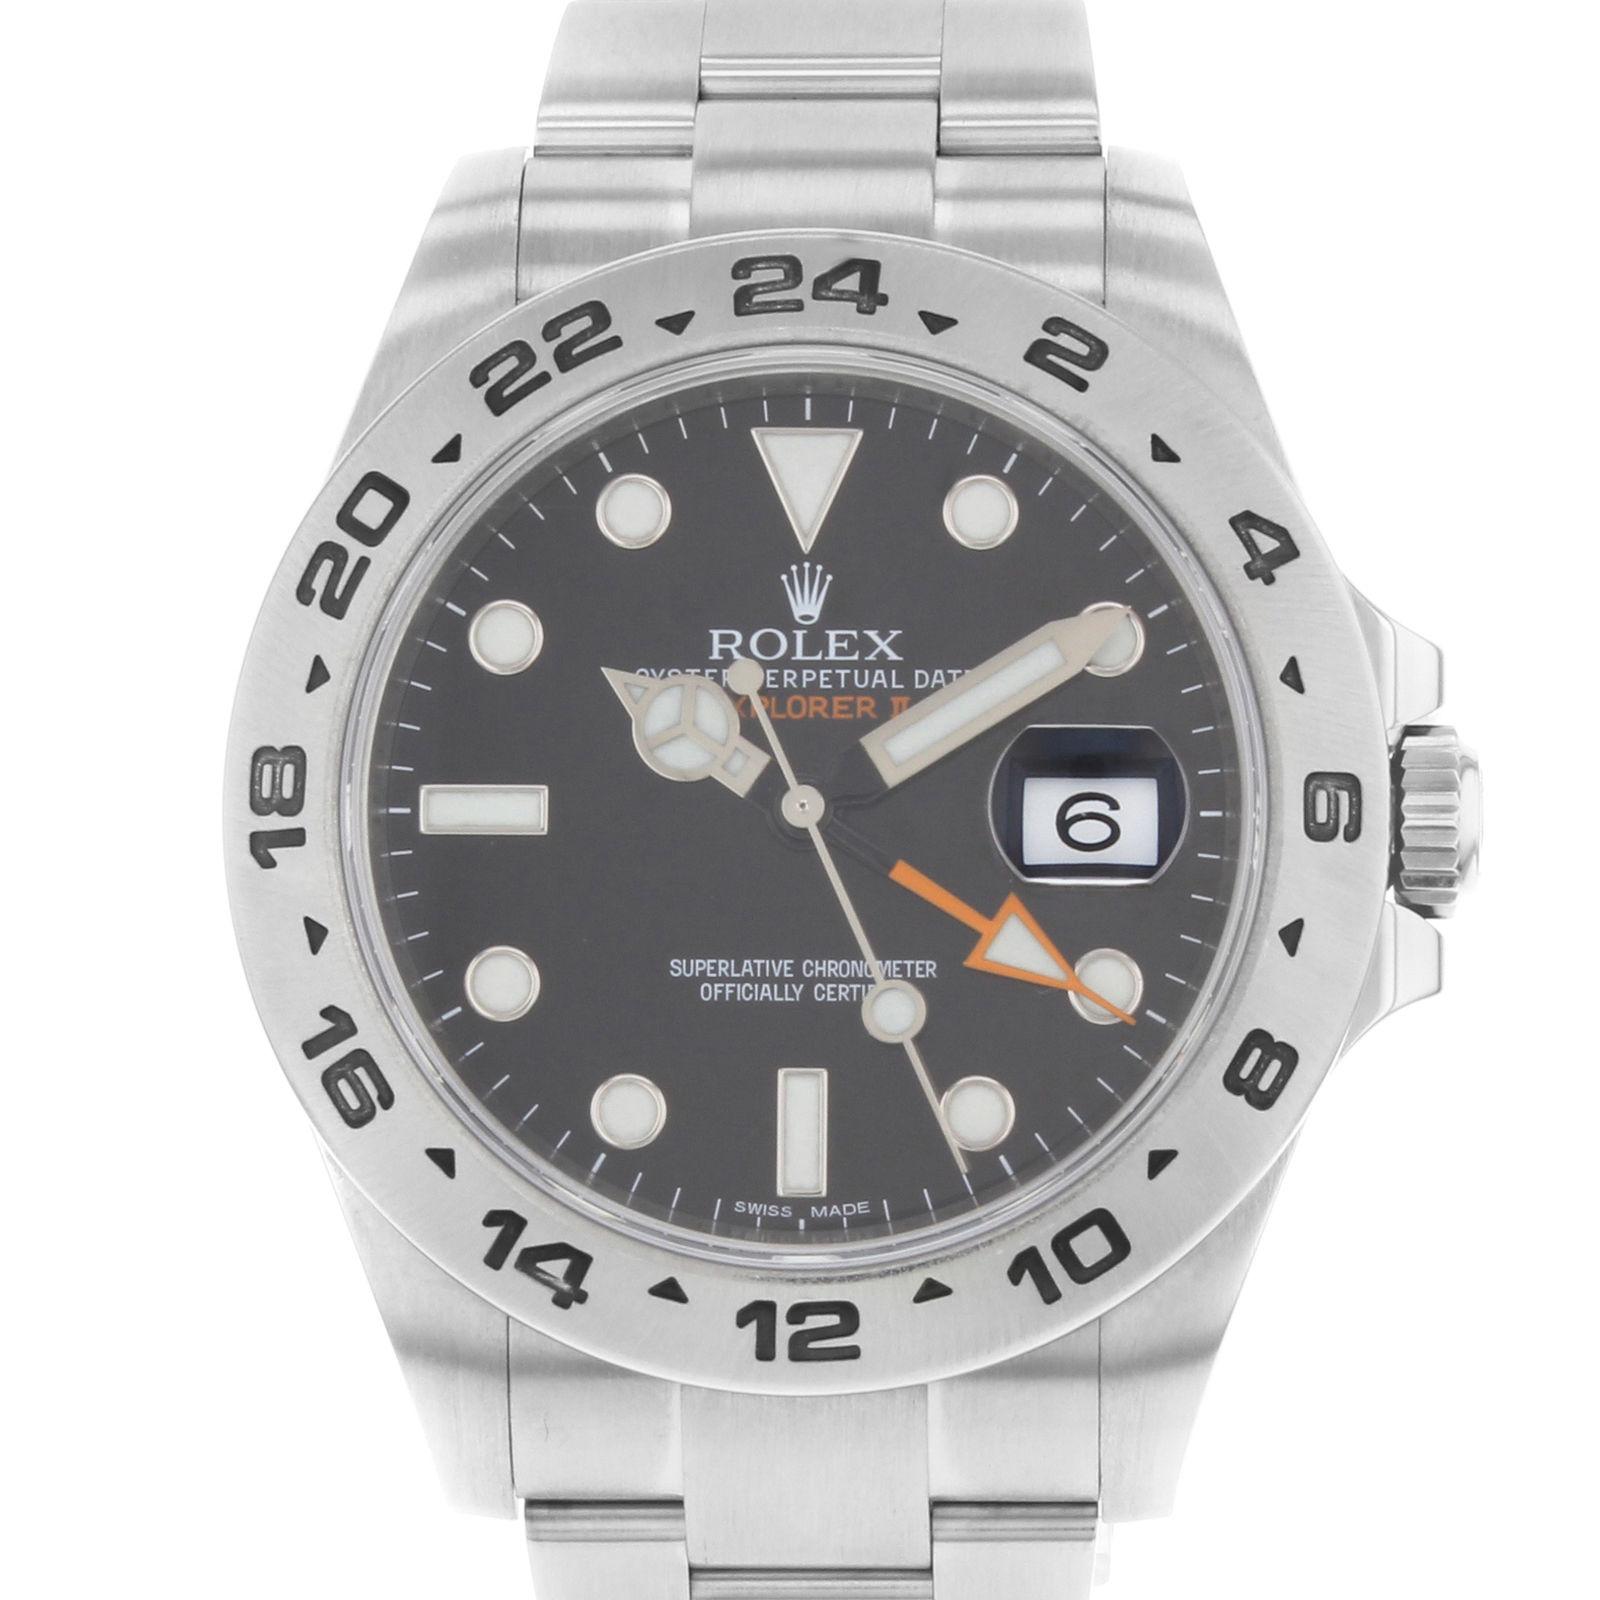 (17490)
This pre-owned Rolex Explorer II 216570 is a beautiful men's timepiece that is powered by an automatic movement which is cased in a stainless steel case. It has a round shape face, date, dual time dial and has hand sticks & dots style